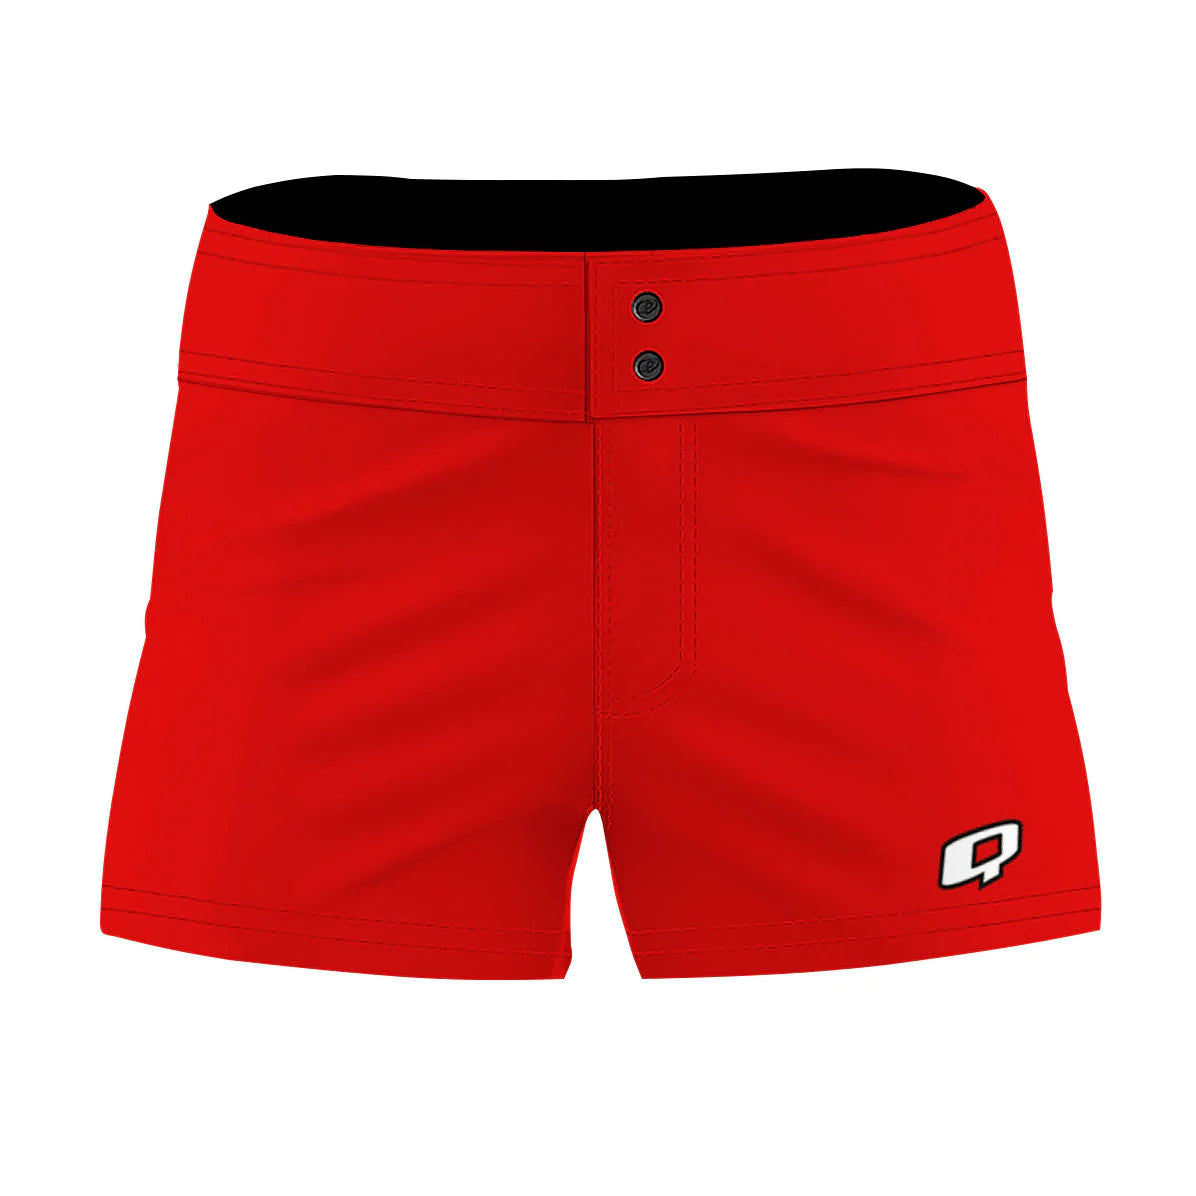 Red Solid Color - Women Board Shorts